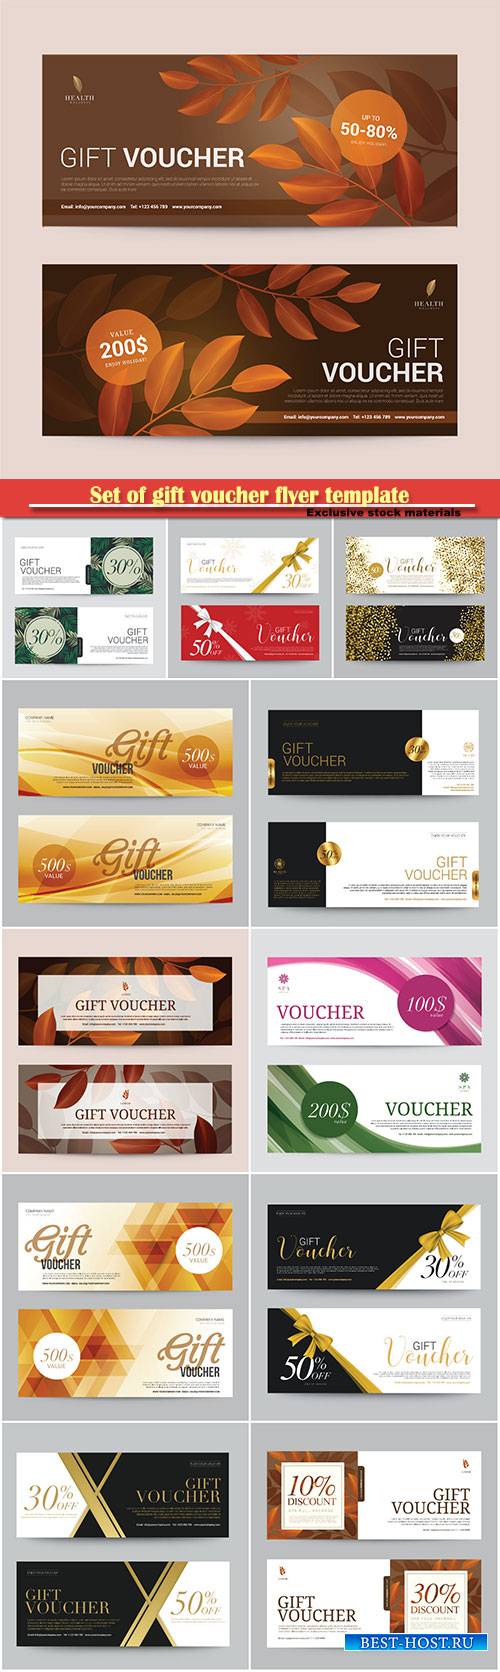 Set of gift voucher flyer template, abstract background vector illustration